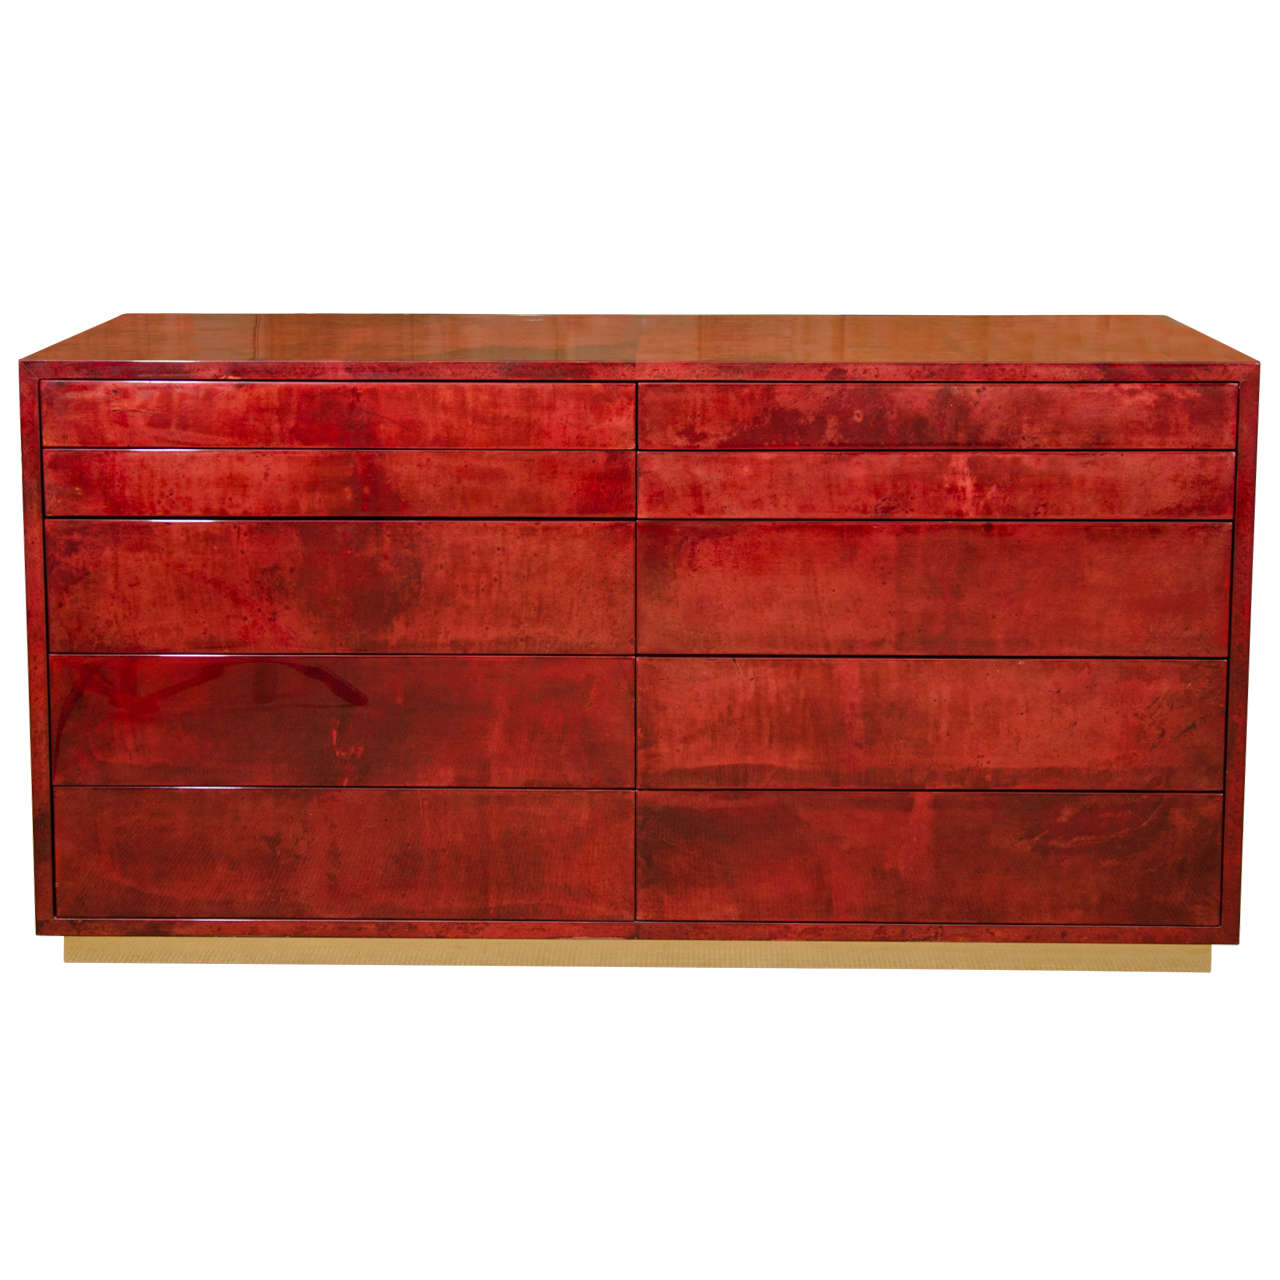 Aldo Tura Red Parchment Commode with Ten Drawers For Sale